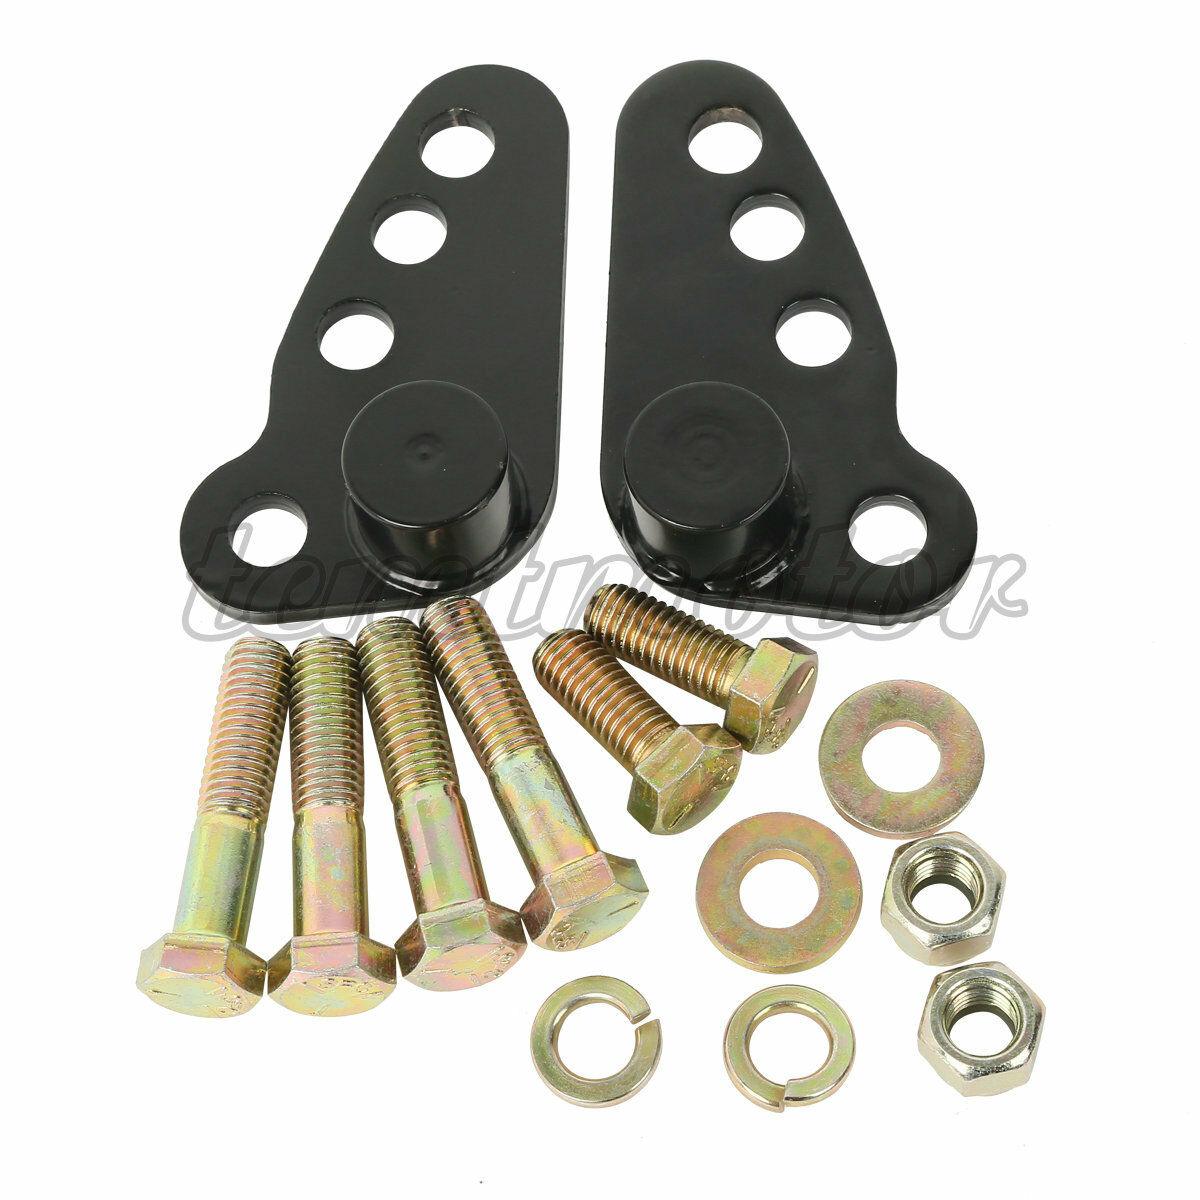 Rear Adjustable Lowering Kit For Harley Road Ultra Street Electra Glide 2002-16 - Moto Life Products